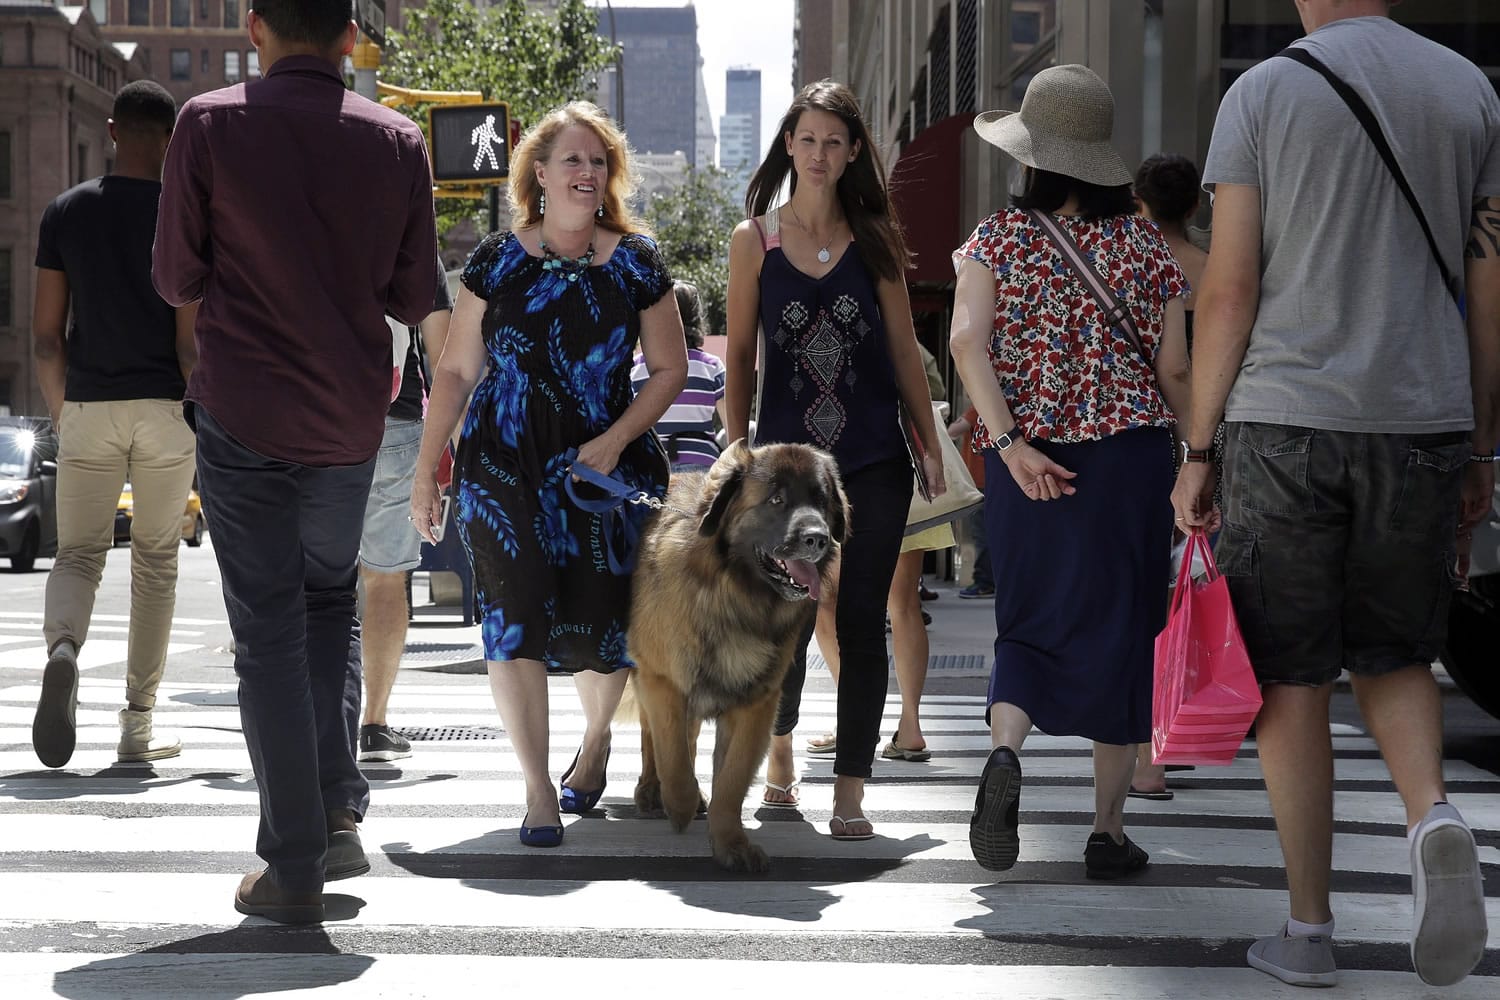 Morgan Avila, left center, walks Magnito, a Leonberger, as he's evaluated by Sarah Fraser, right center, through pedestrians on Madison Ave.